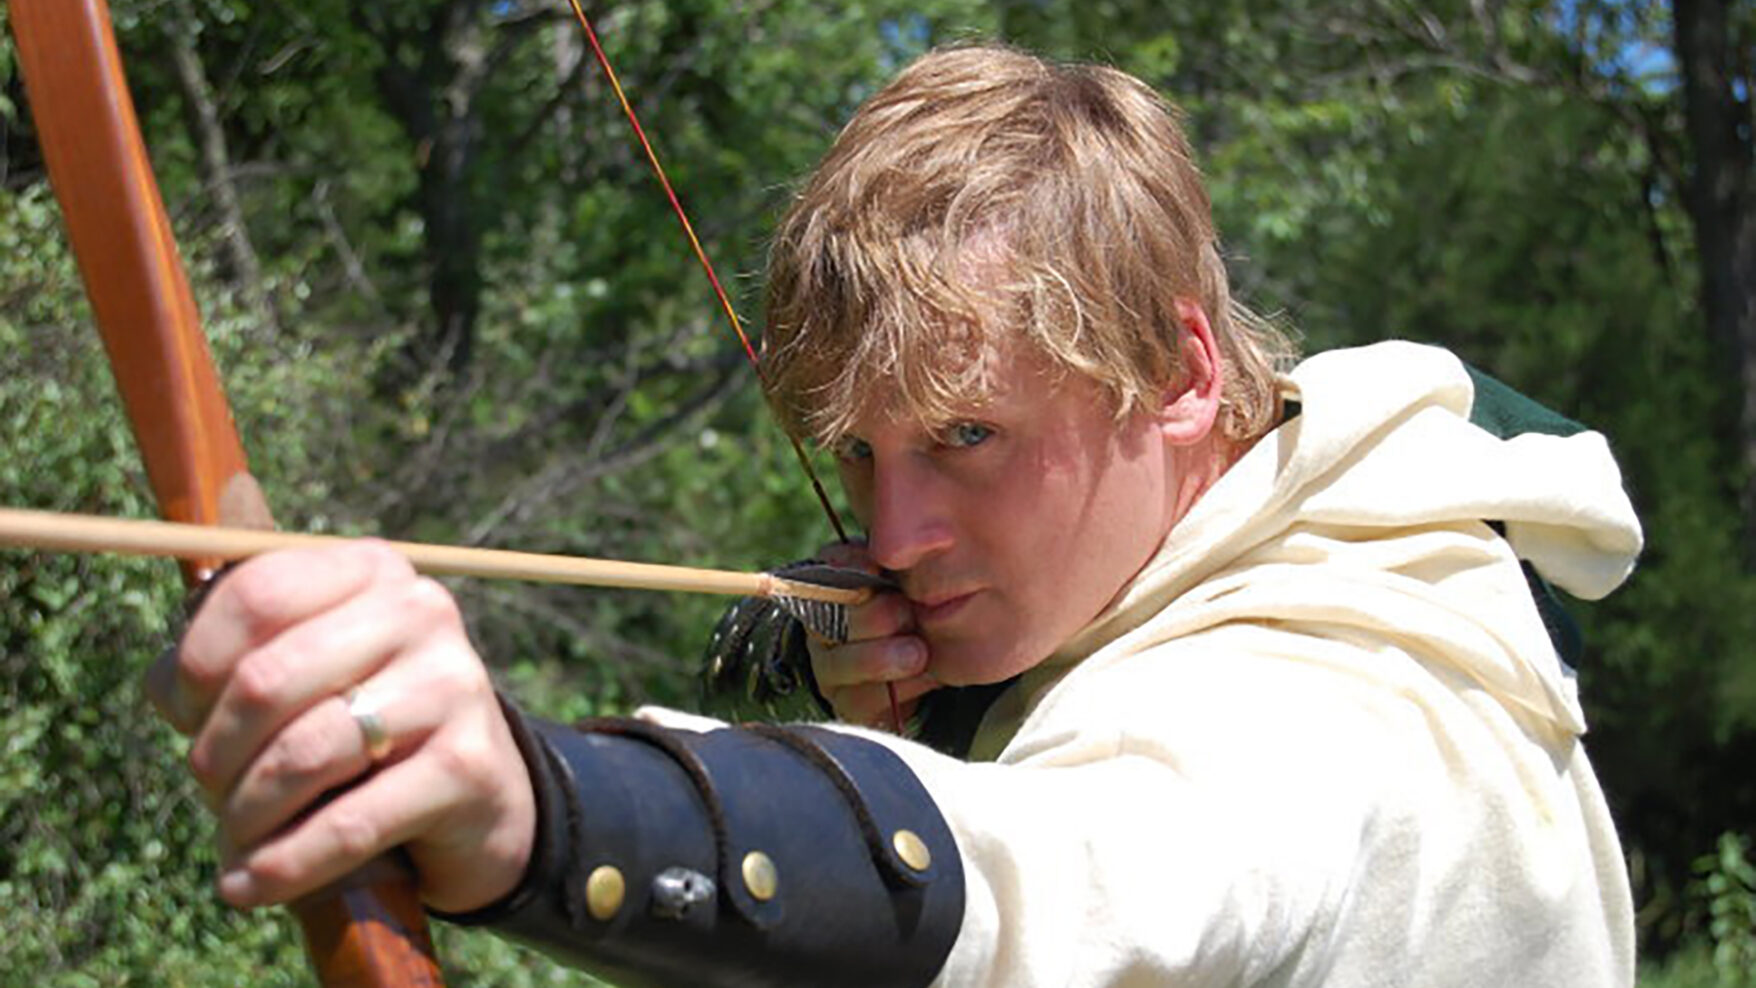 An image of Jeff in an archer costume, holding a bow and arrow, posing as if ready to shoot.